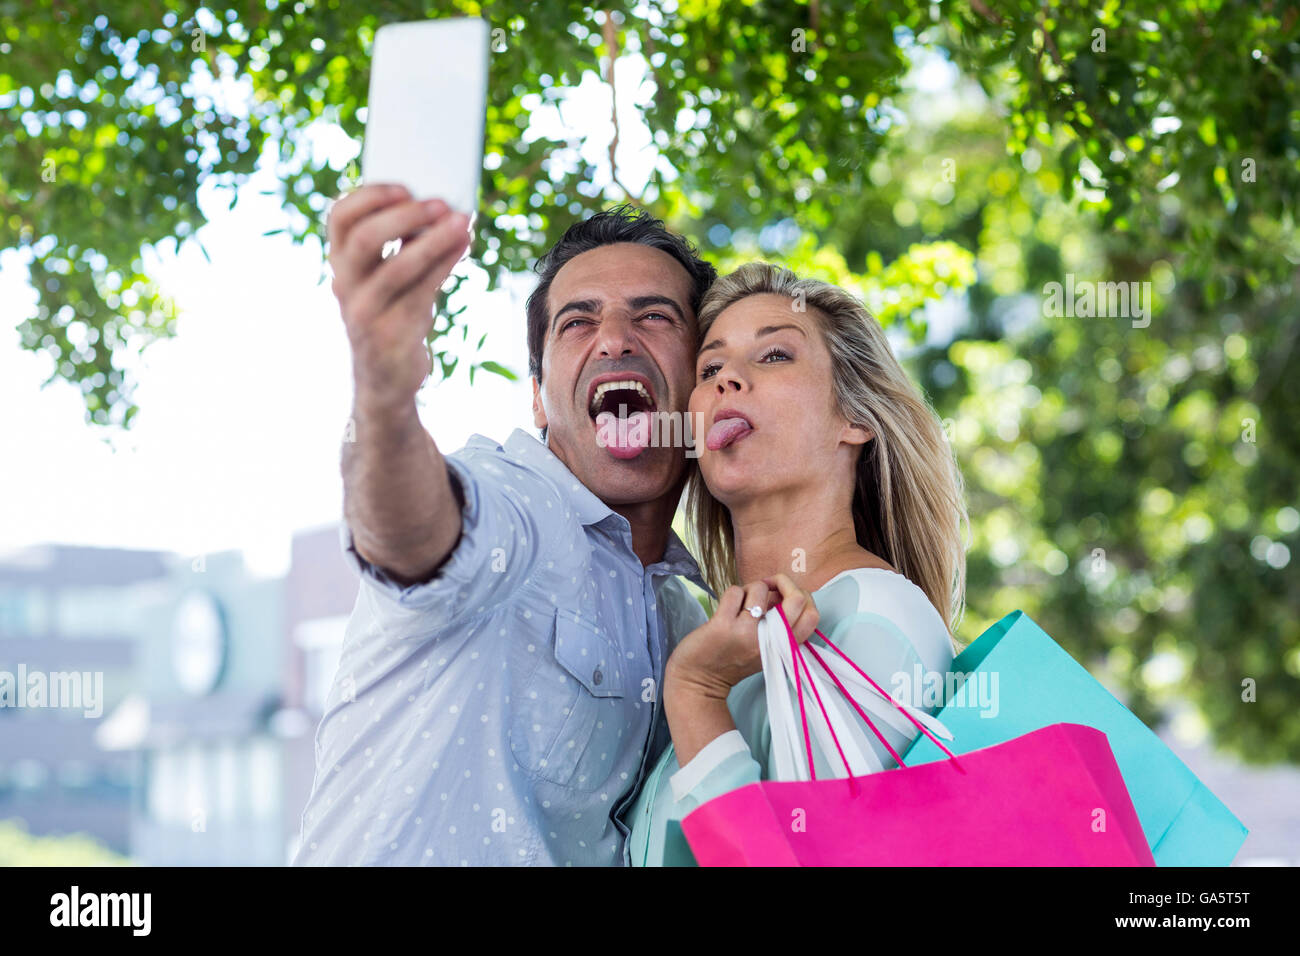 Couple making face while taking selfie Stock Photo